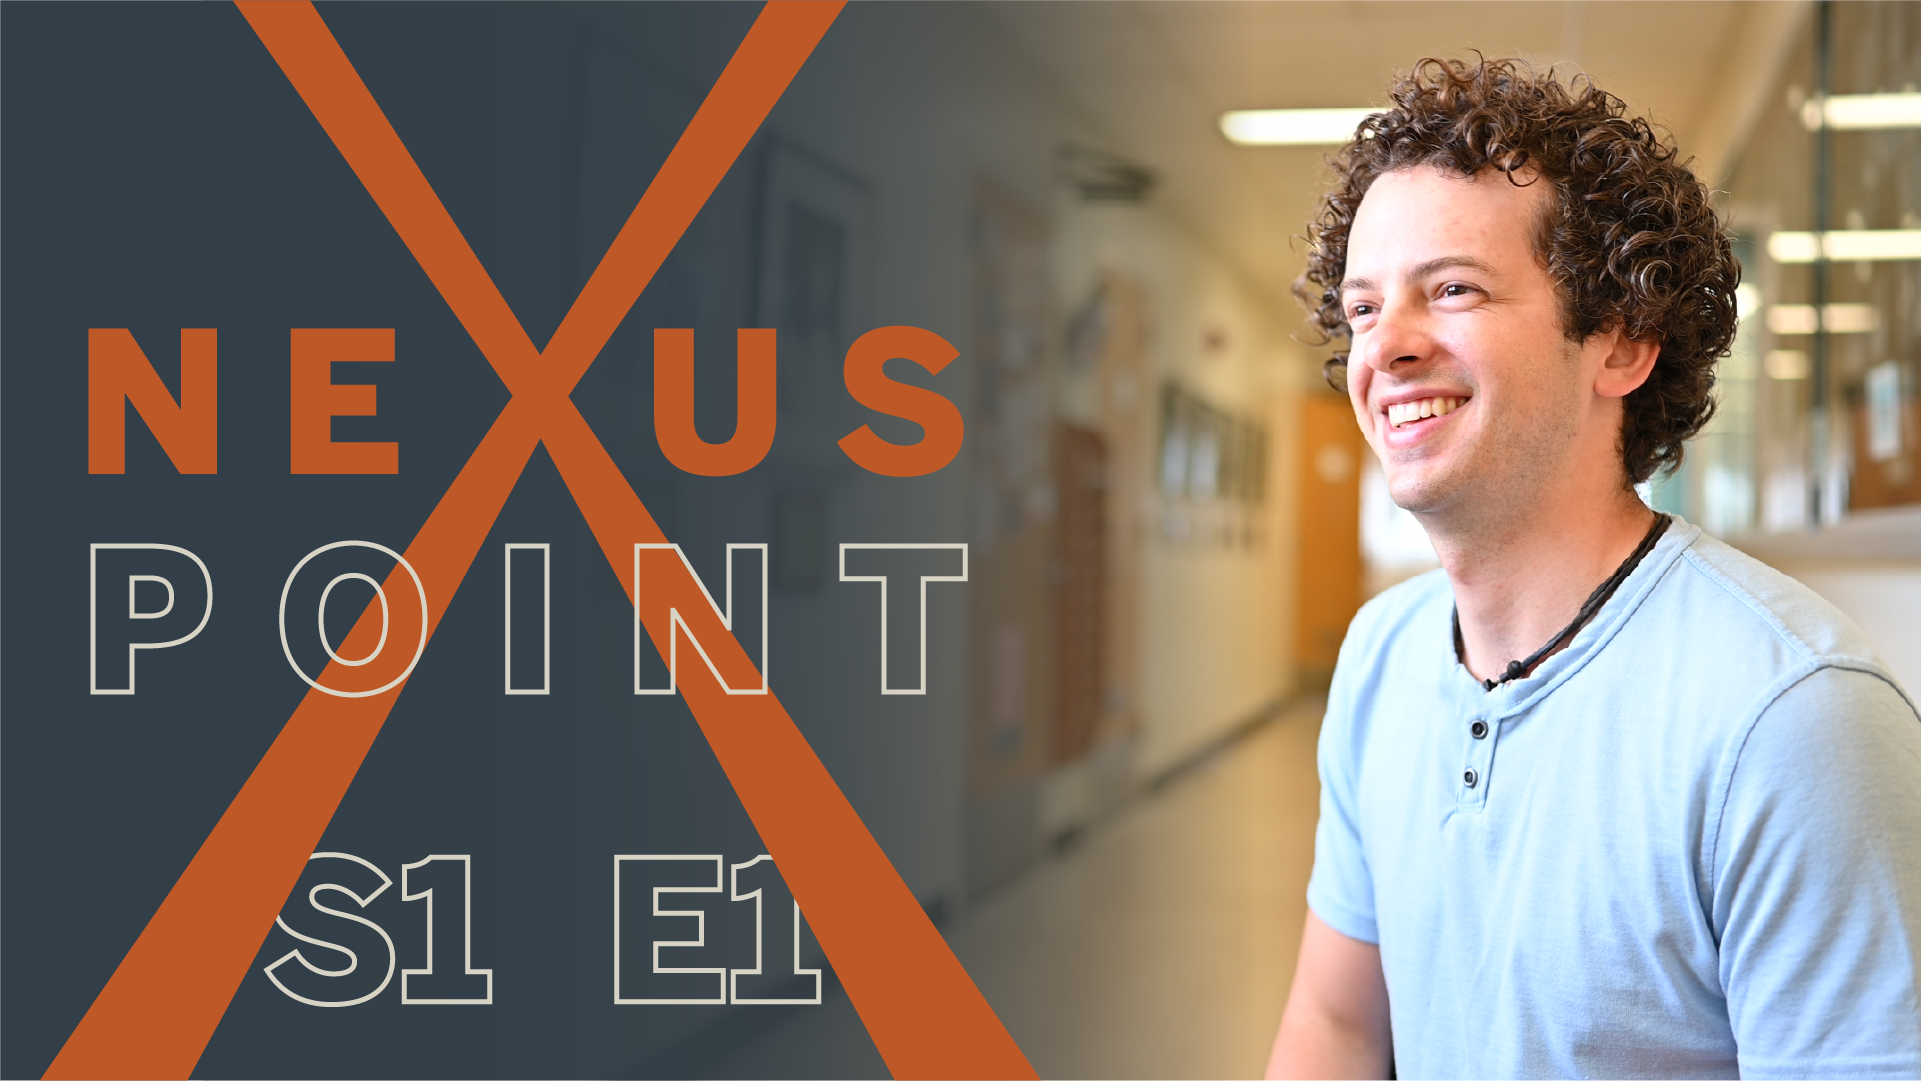 Smiling student with curly brown hair next to a text infographic that says "Nexus Point S1 E1"